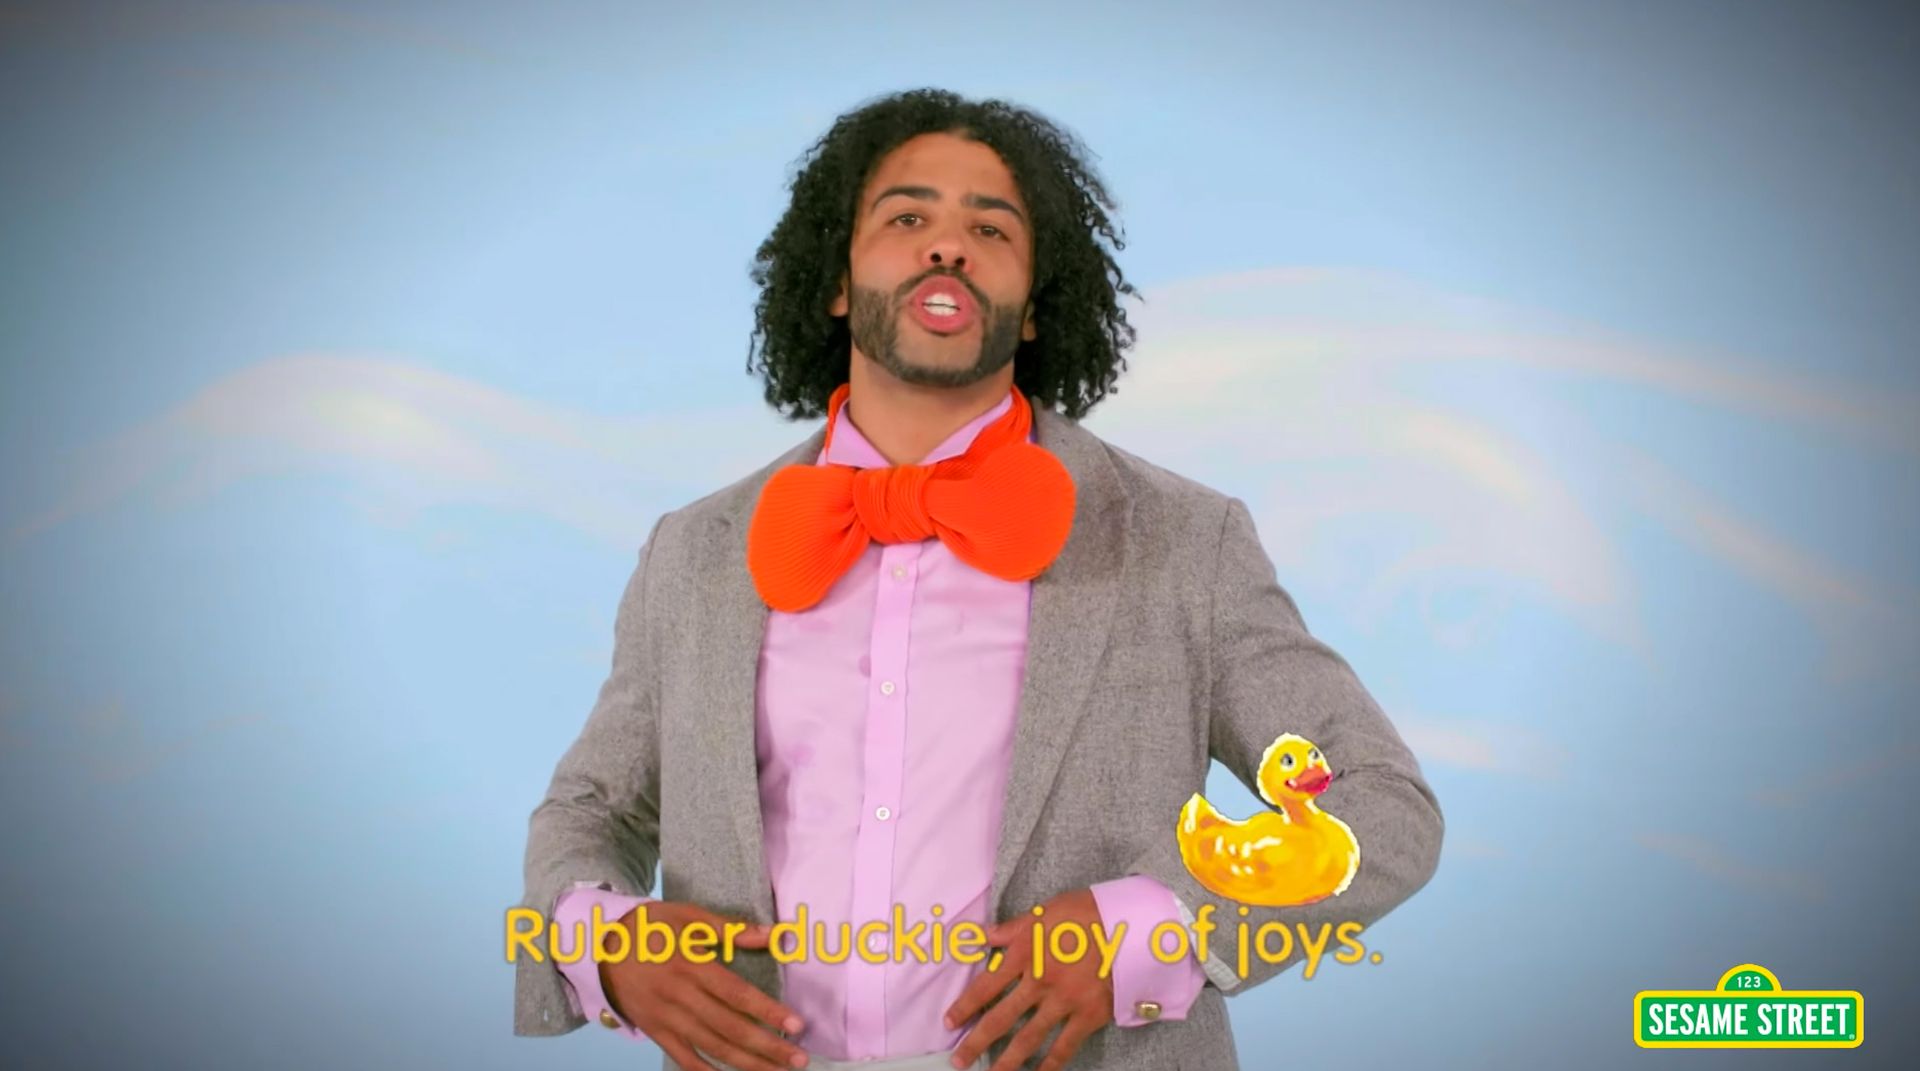 Black History Month on Sesame Street: Hamilton's Daveed Diggs sings and raps with Rubber Duckie.